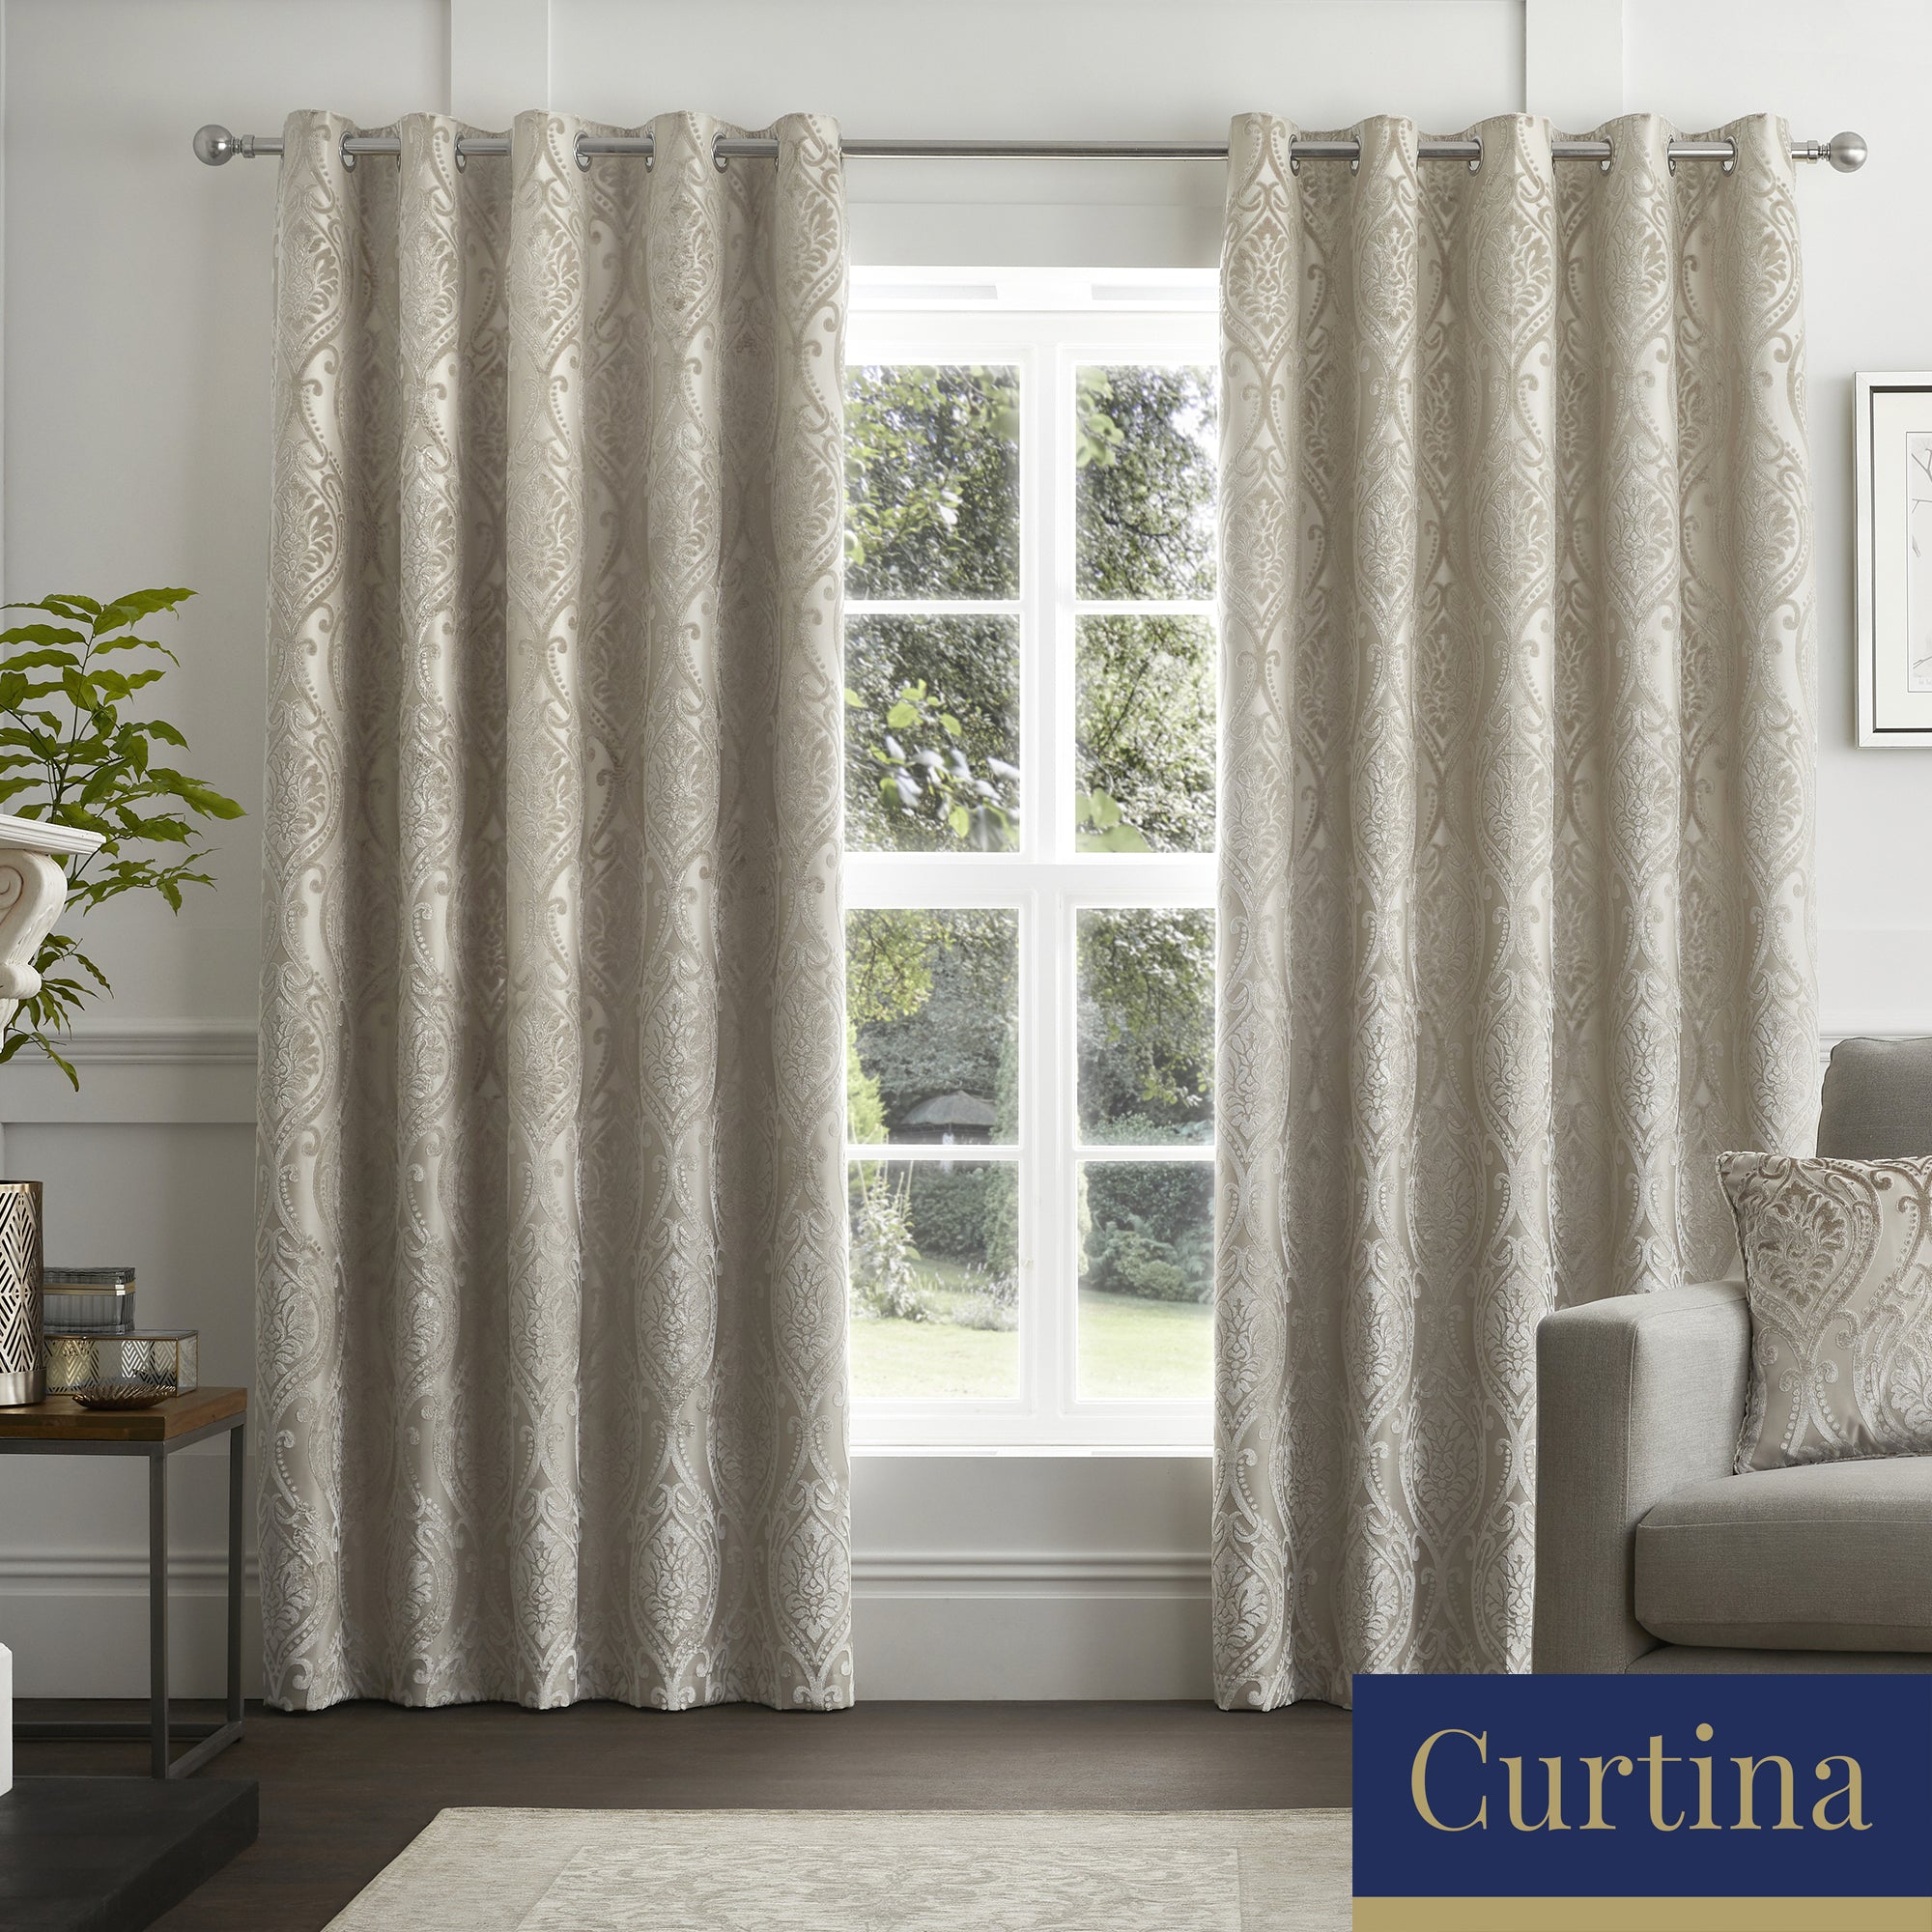 Chateau - Damask Jacquard Eyelet Curtains in Natural - By Curtina